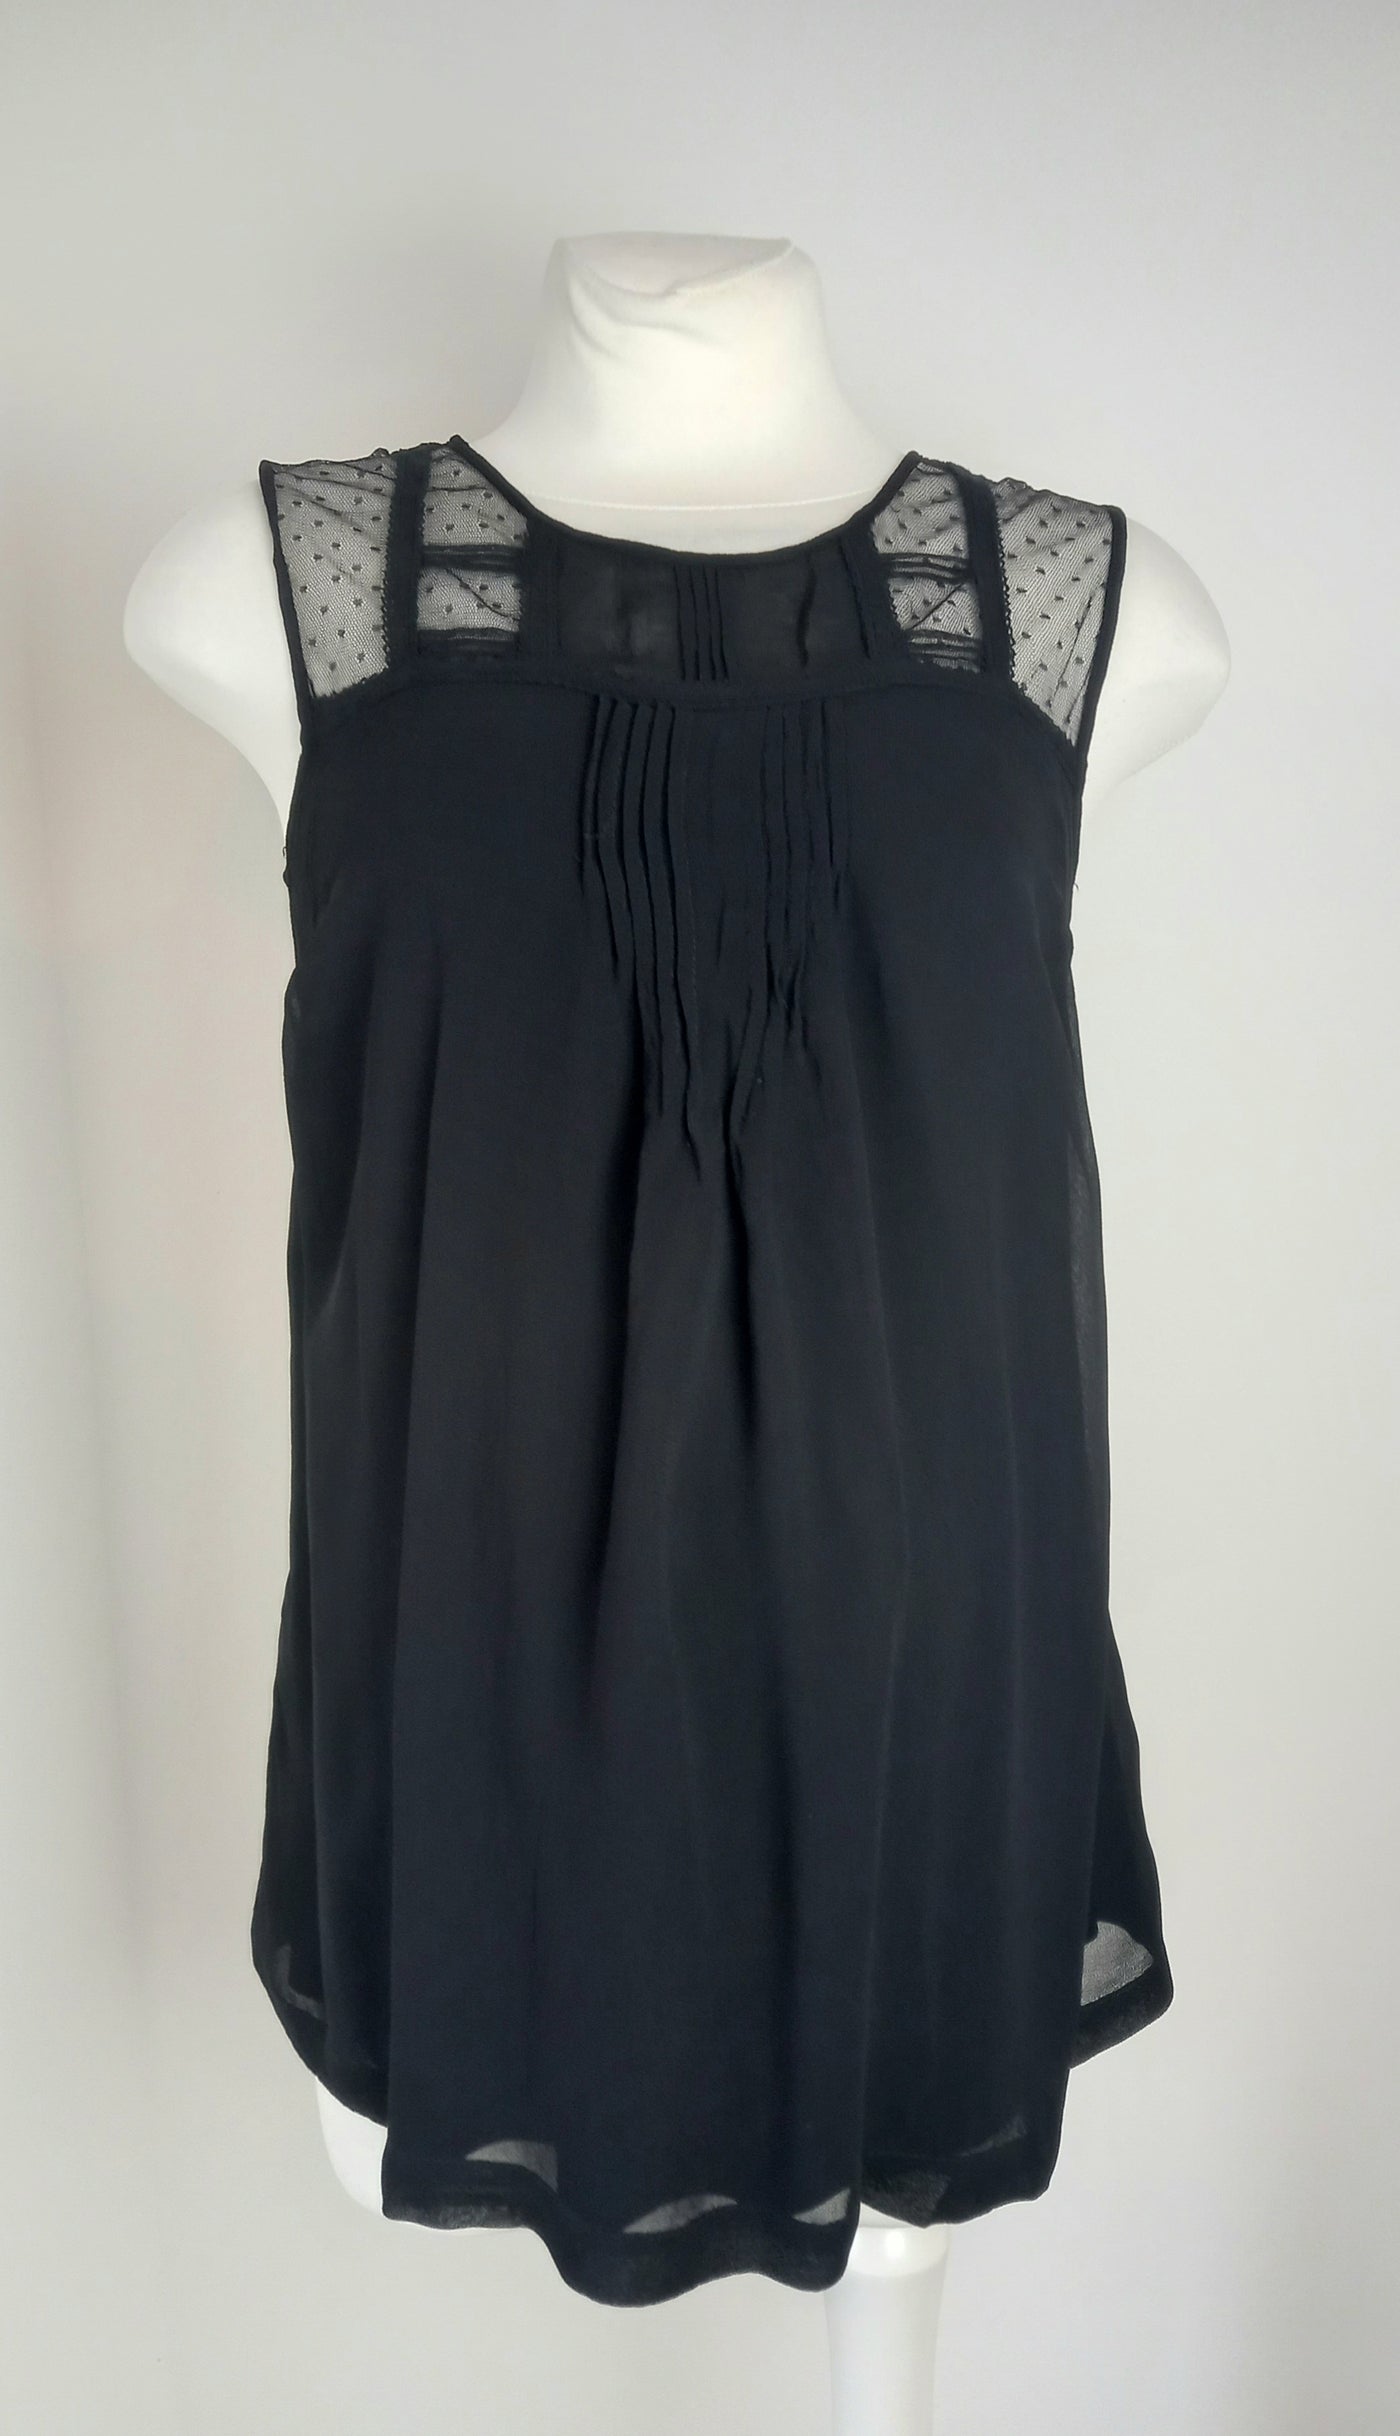 Seraphine Black sleeveless top with sheer shoulder detail - Size 8